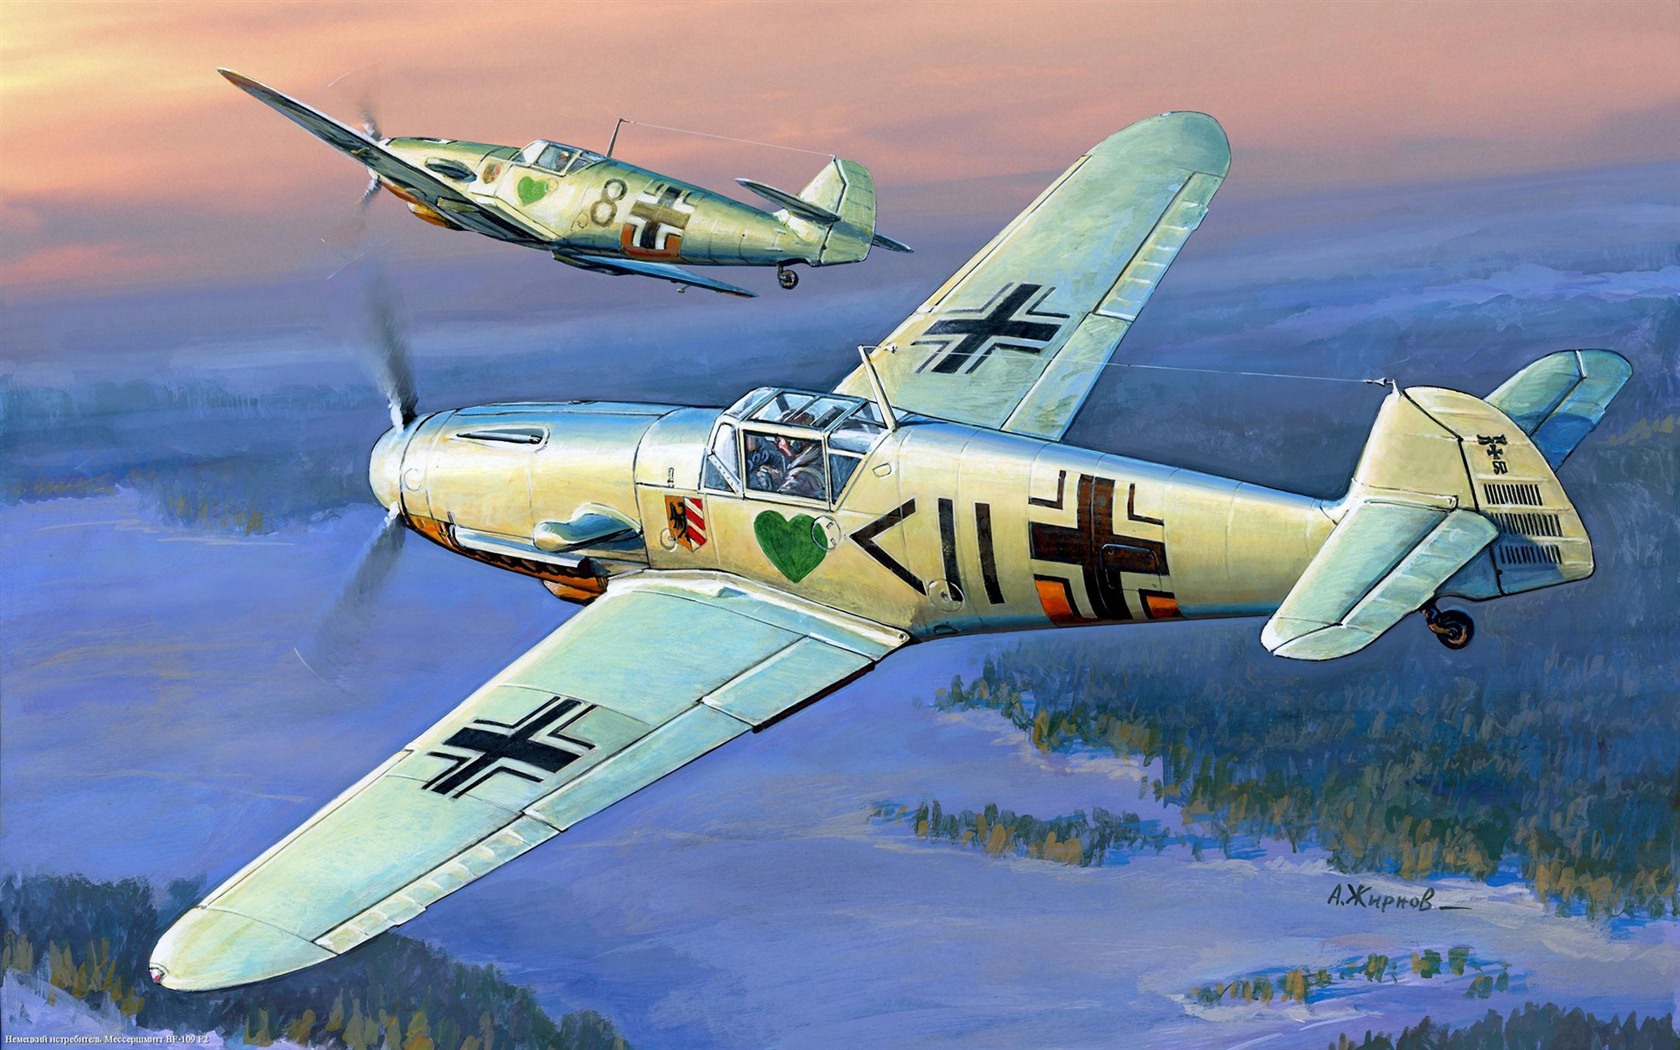 Military aircraft flight exquisite painting wallpapers #12 - 1680x1050